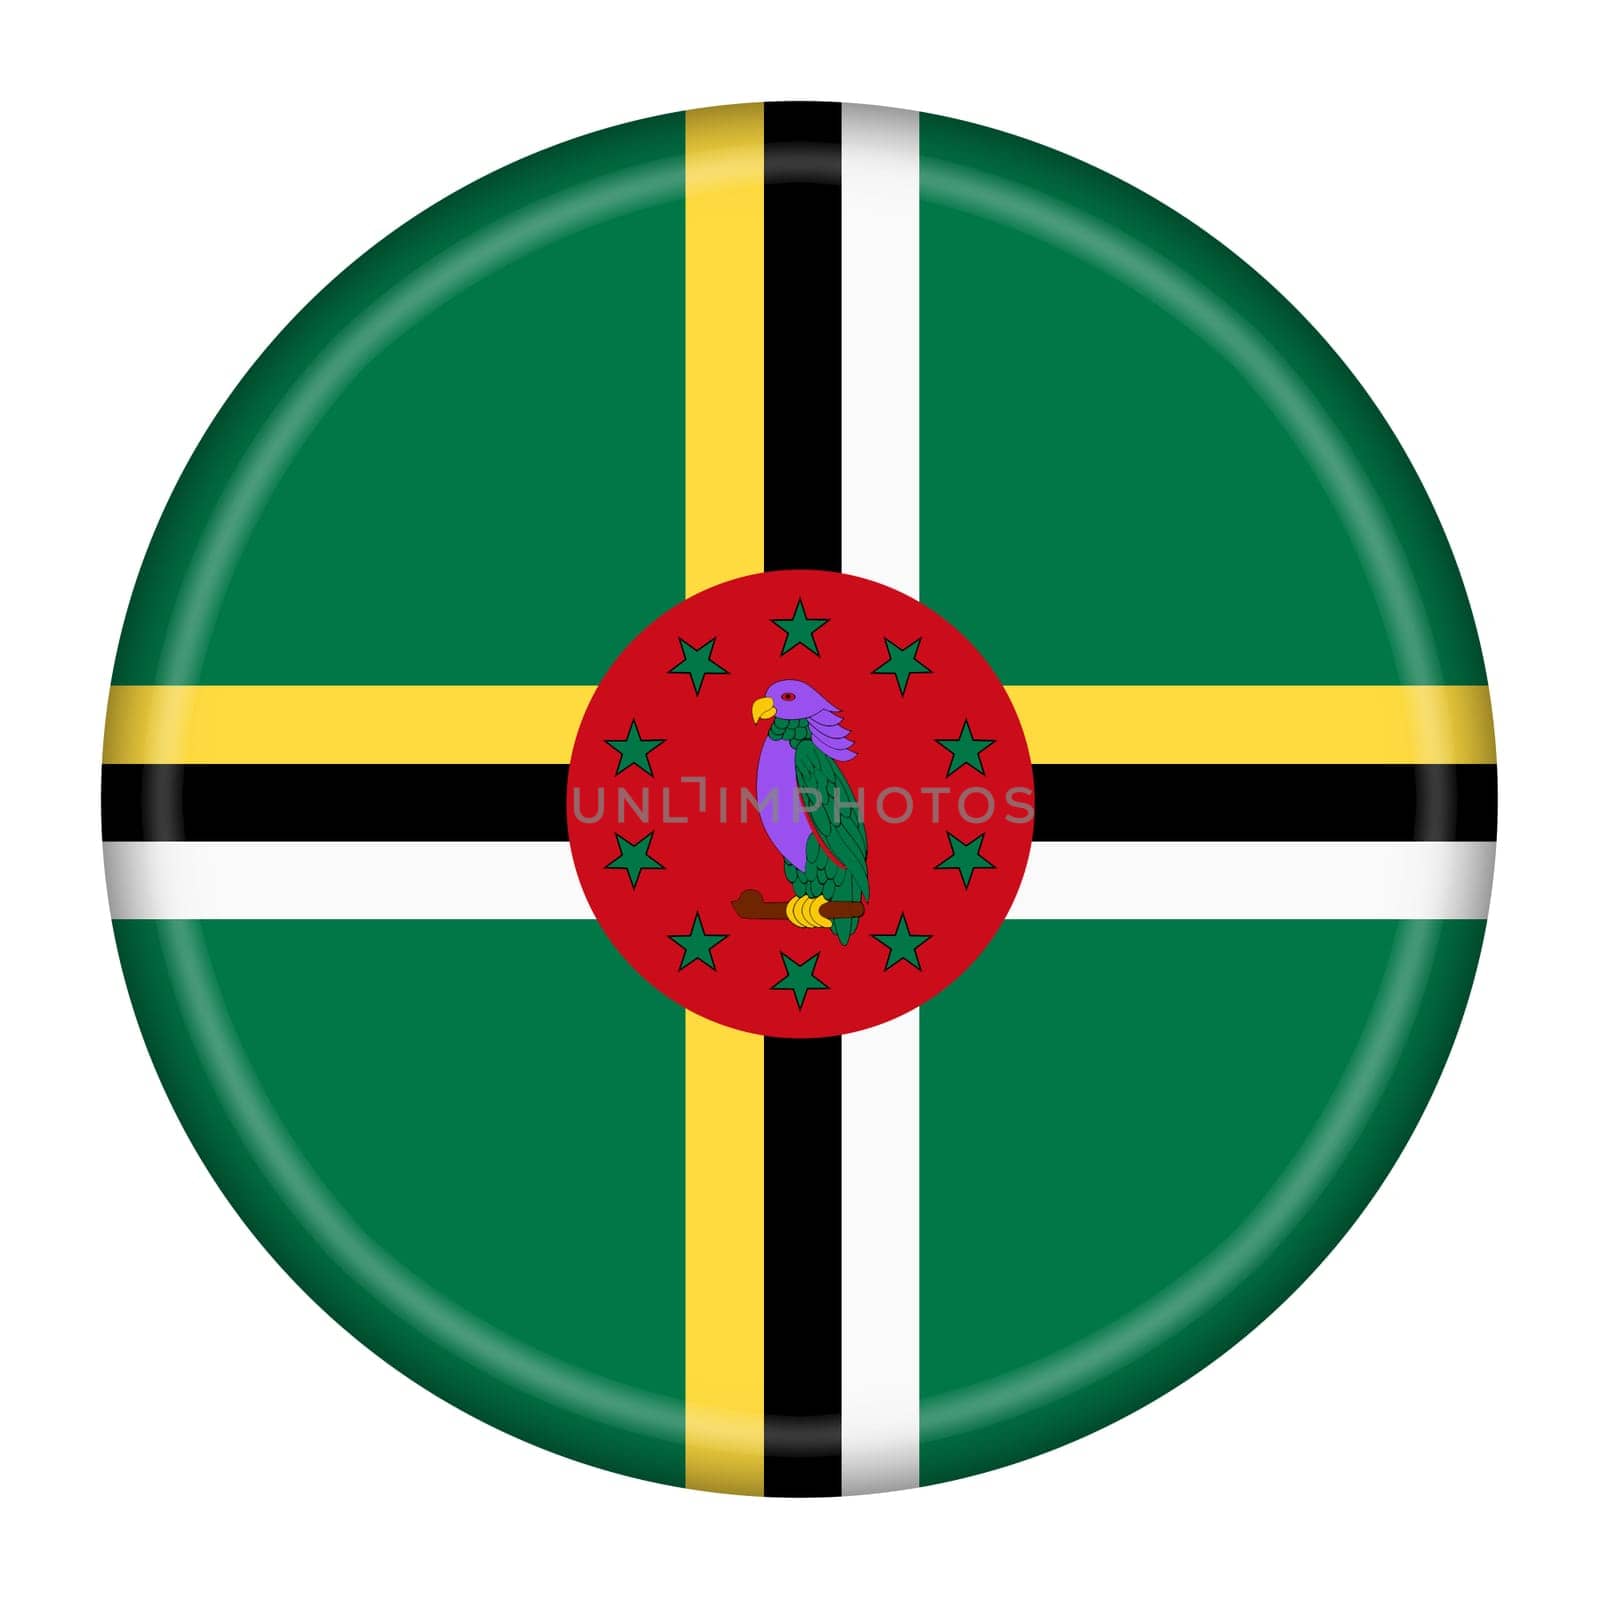 A Dominica flag button 3d illustration with clipping path